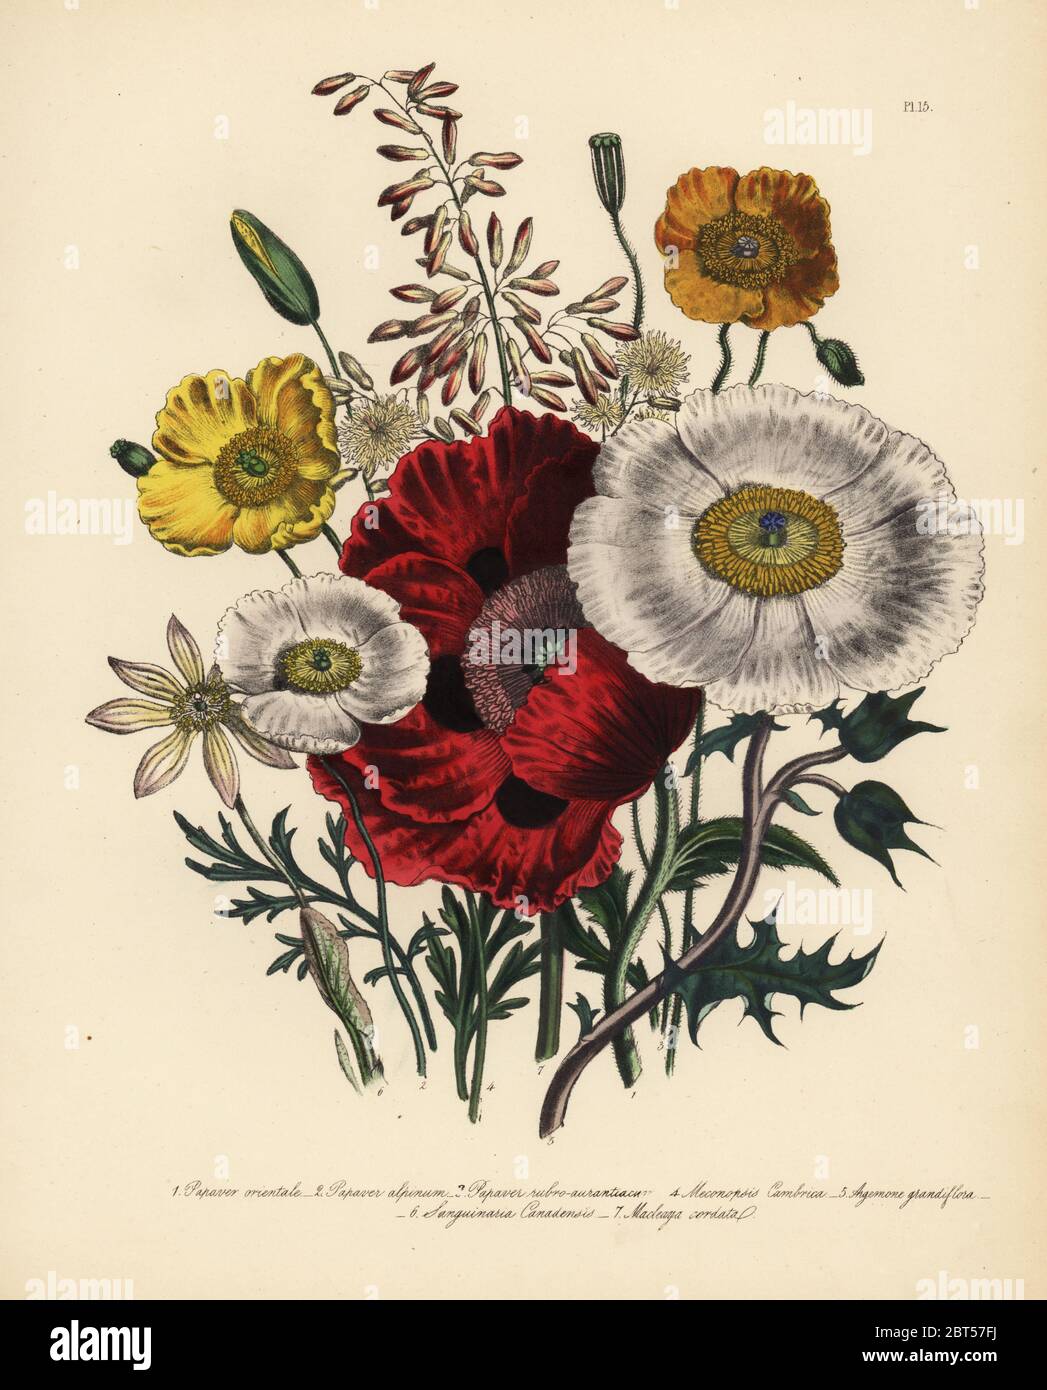 Oriental poppy, Papaver orientale, alpine poppy, Papaver alpinum, orange-red poppy, P. rubro-aurantiacum, common Welsh poppy, Meconopsis cambrica, large-flowered prickly poppy, Argemone grandiflora, Canadian bloodroot, Sanguinaria canadensis, and cordate-leaved macleaya, Macleaya cordata. Handfinished chromolithograph by Henry Noel Humphreys after an illustration by Jane Loudon from Mrs. Jane Loudon's Ladies Flower Garden of Ornamental Perennials, William S. Orr, London, 1849. Stock Photo